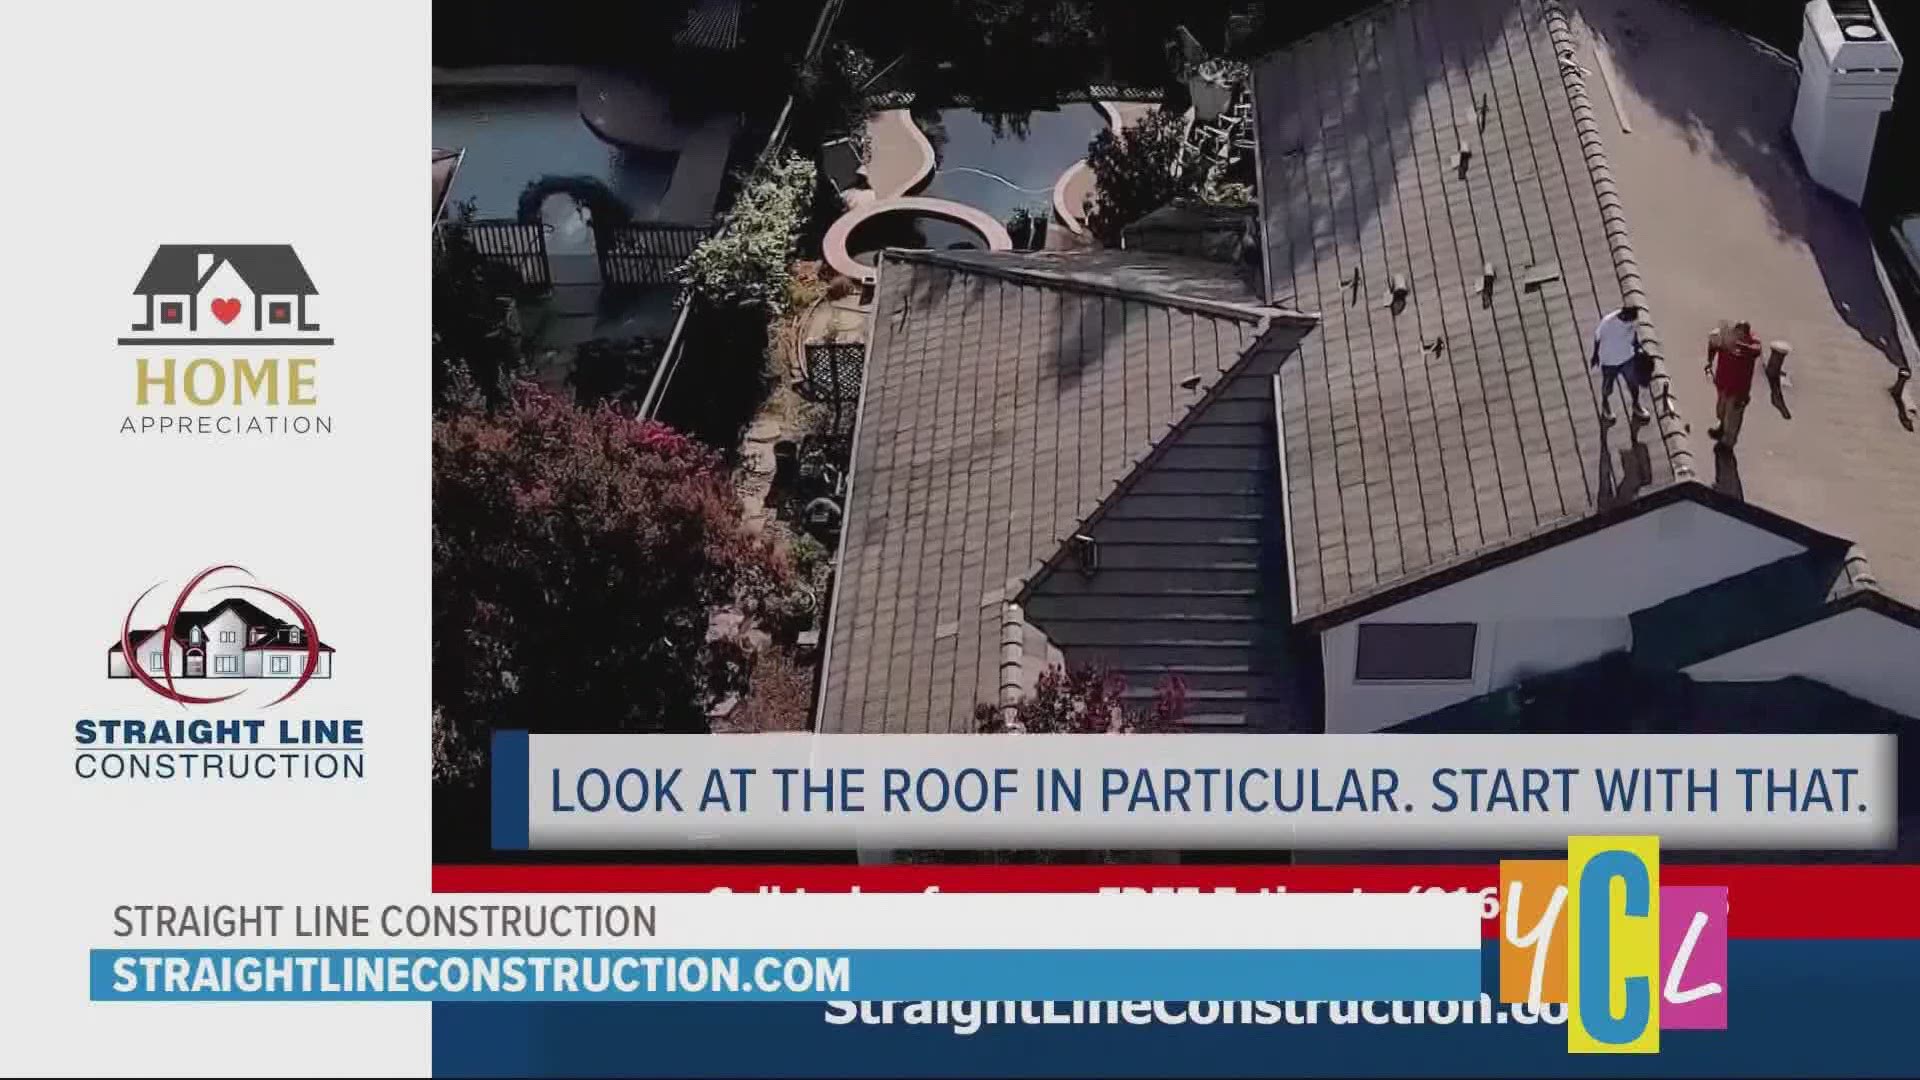 Jack Borba explains roofers are already getting booked and it’s best to plan ahead. This segment was paid for by Straight Line Construction.